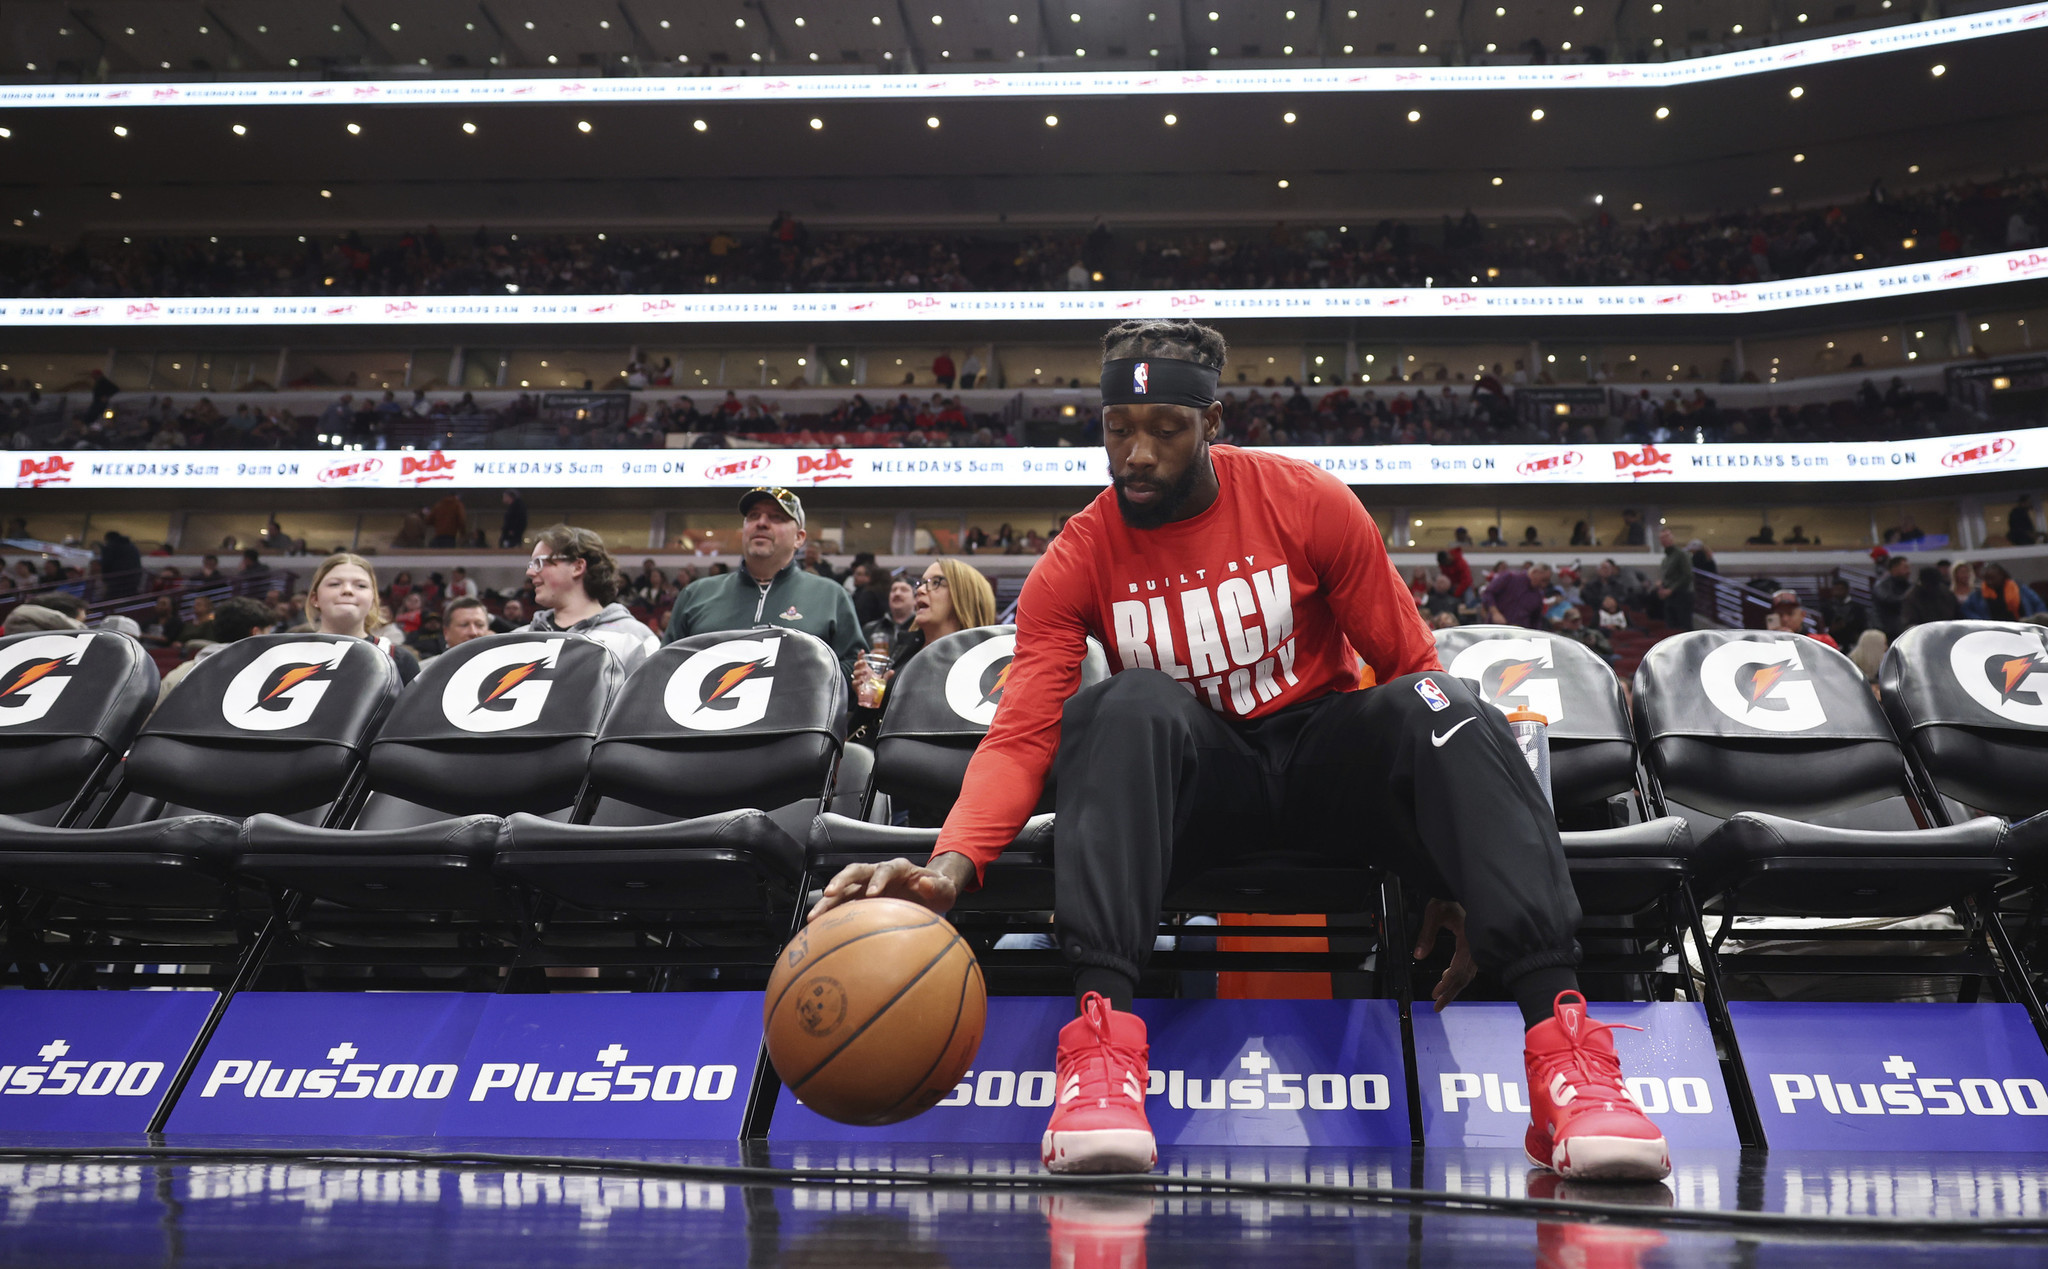 Bulls release 'All-Access' episode on Patrick Beverley, Chicago